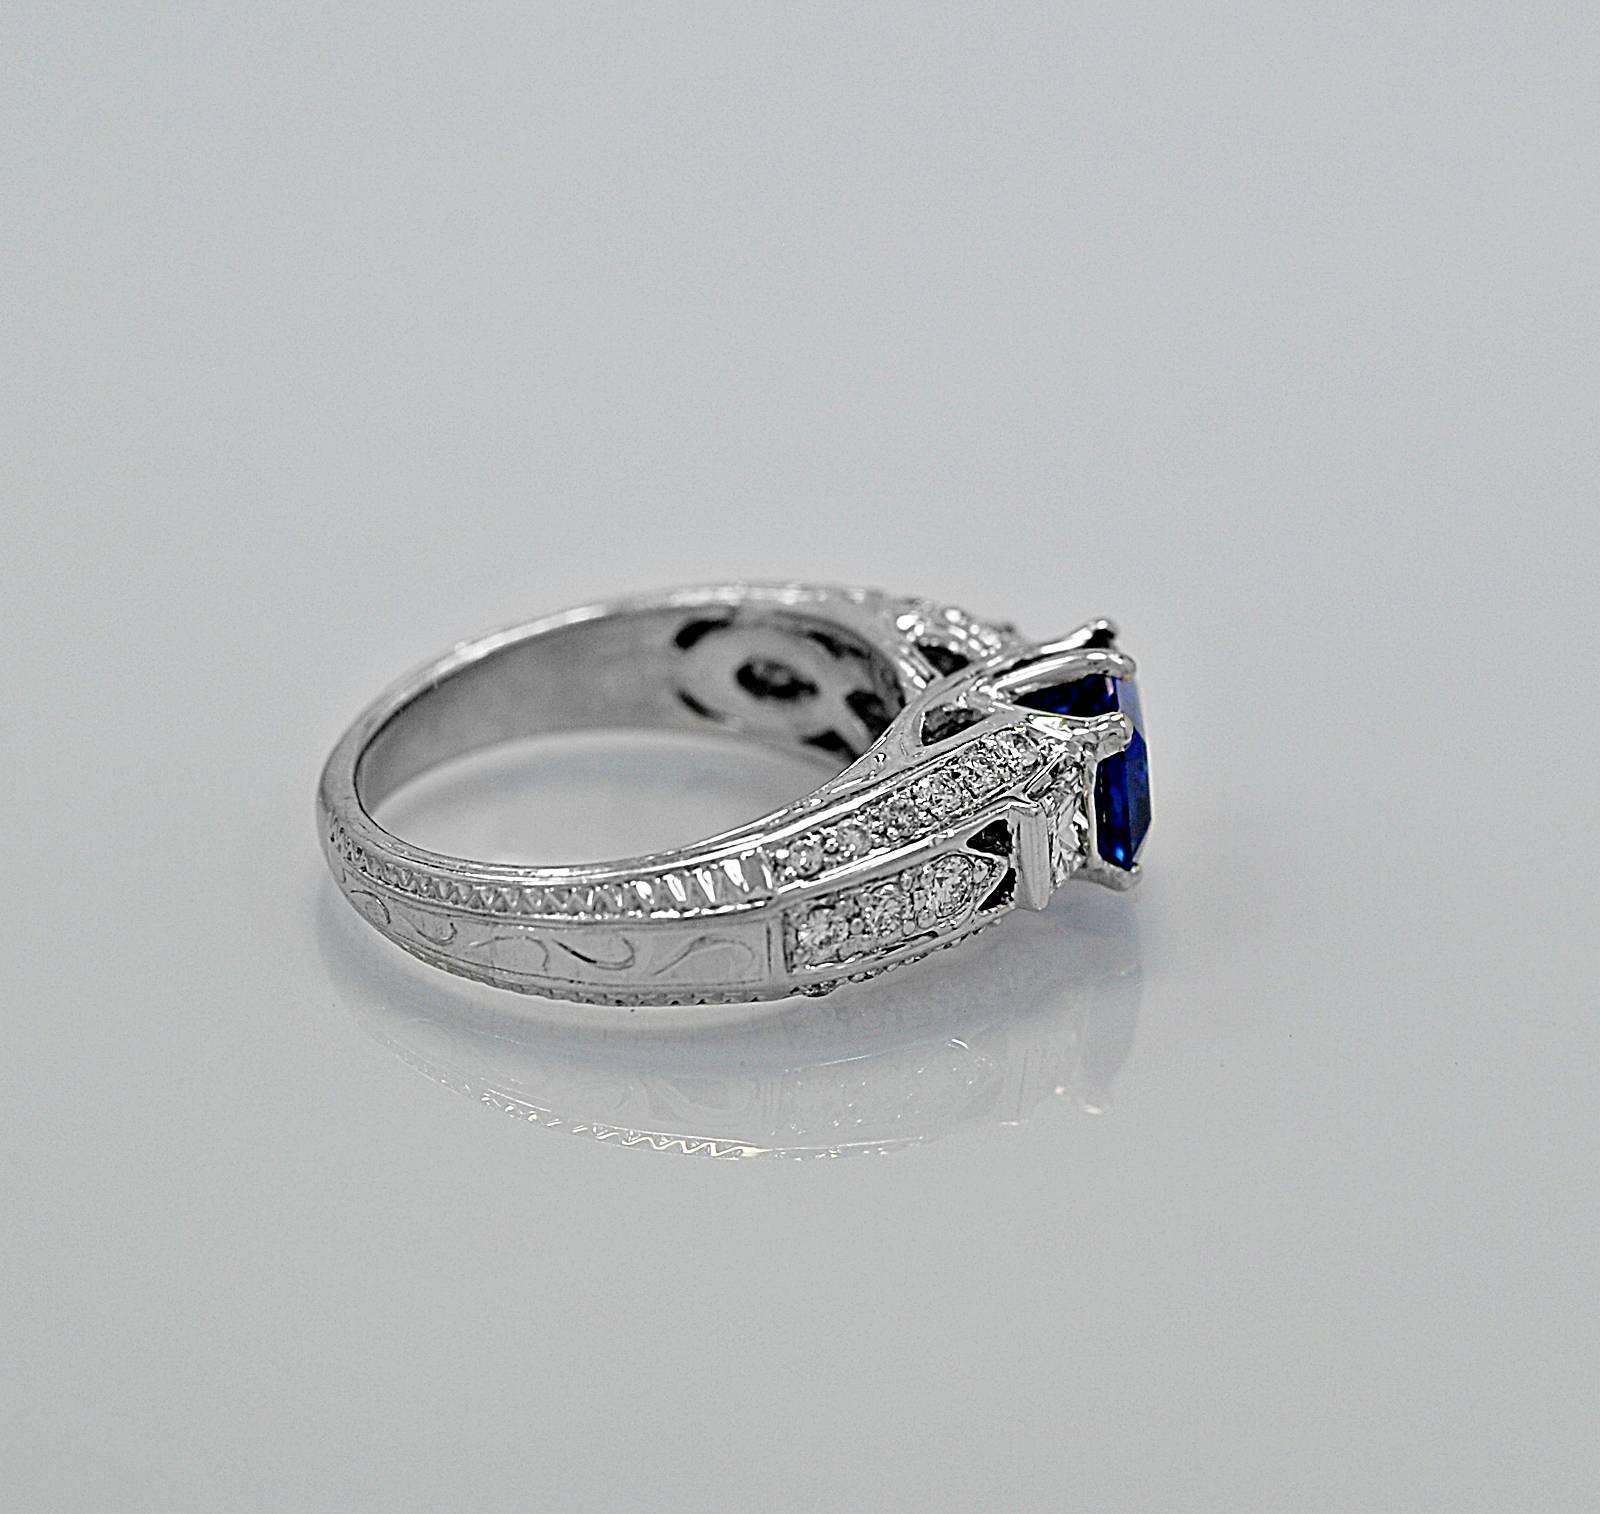 An elegant engagement ring featuring a 1.50ct. natural blue sapphire and accenting .60ct. apx. T.W. of melee diamonds with VS2-SI1 clarity and G-H color. This decorative ring with piercing and engraving is a very nice alternative to a standard